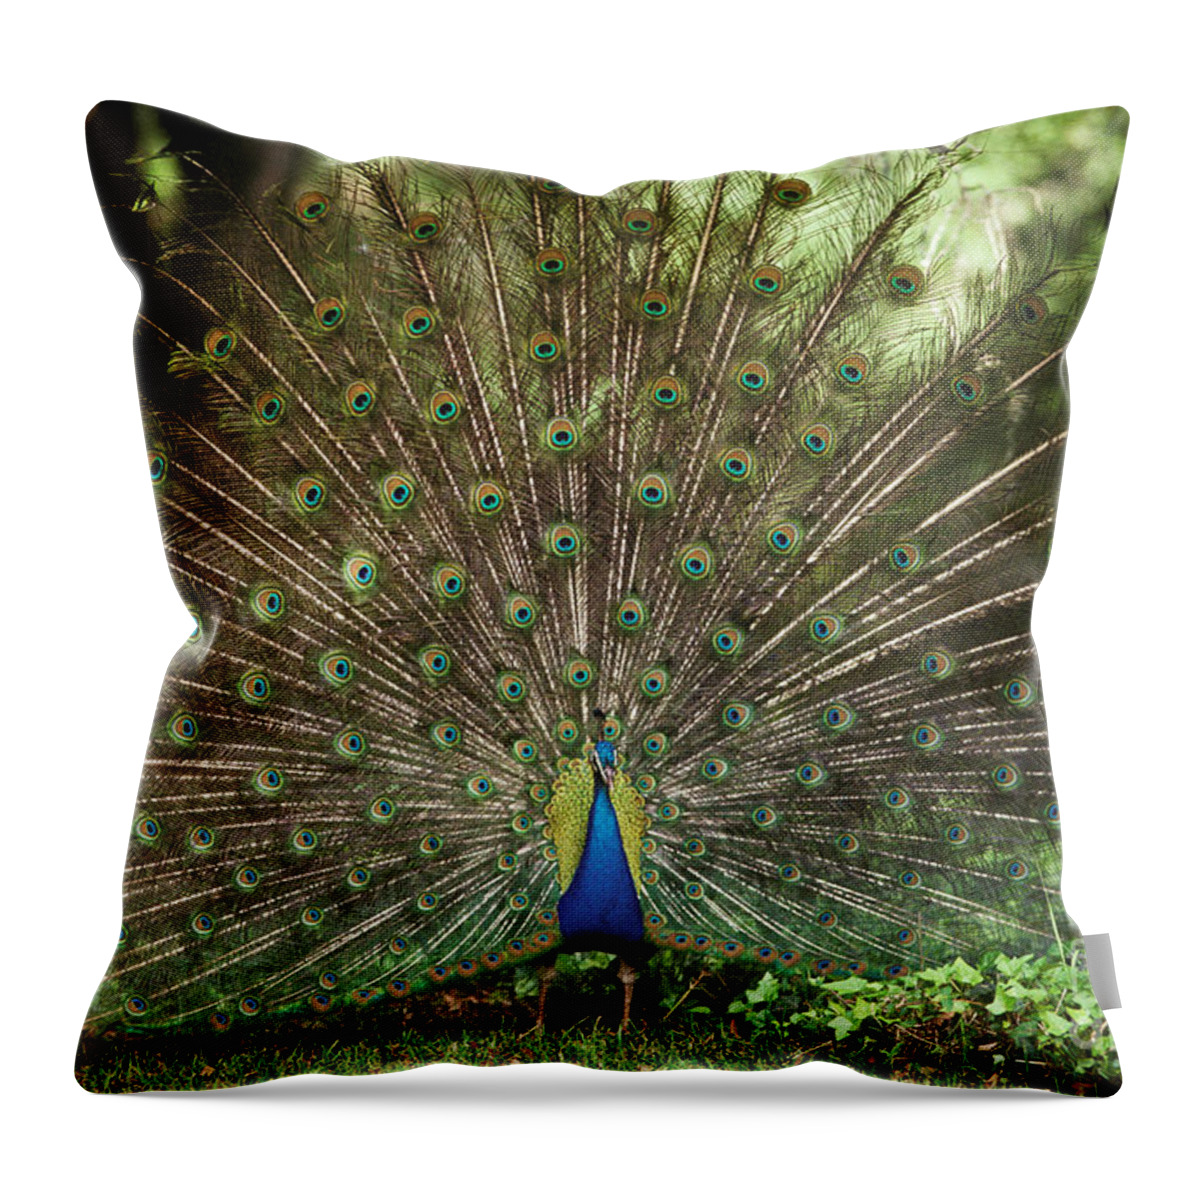 Animal Throw Pillow featuring the photograph Peacock Pavo Cristatus Displaying by Ron Sanford